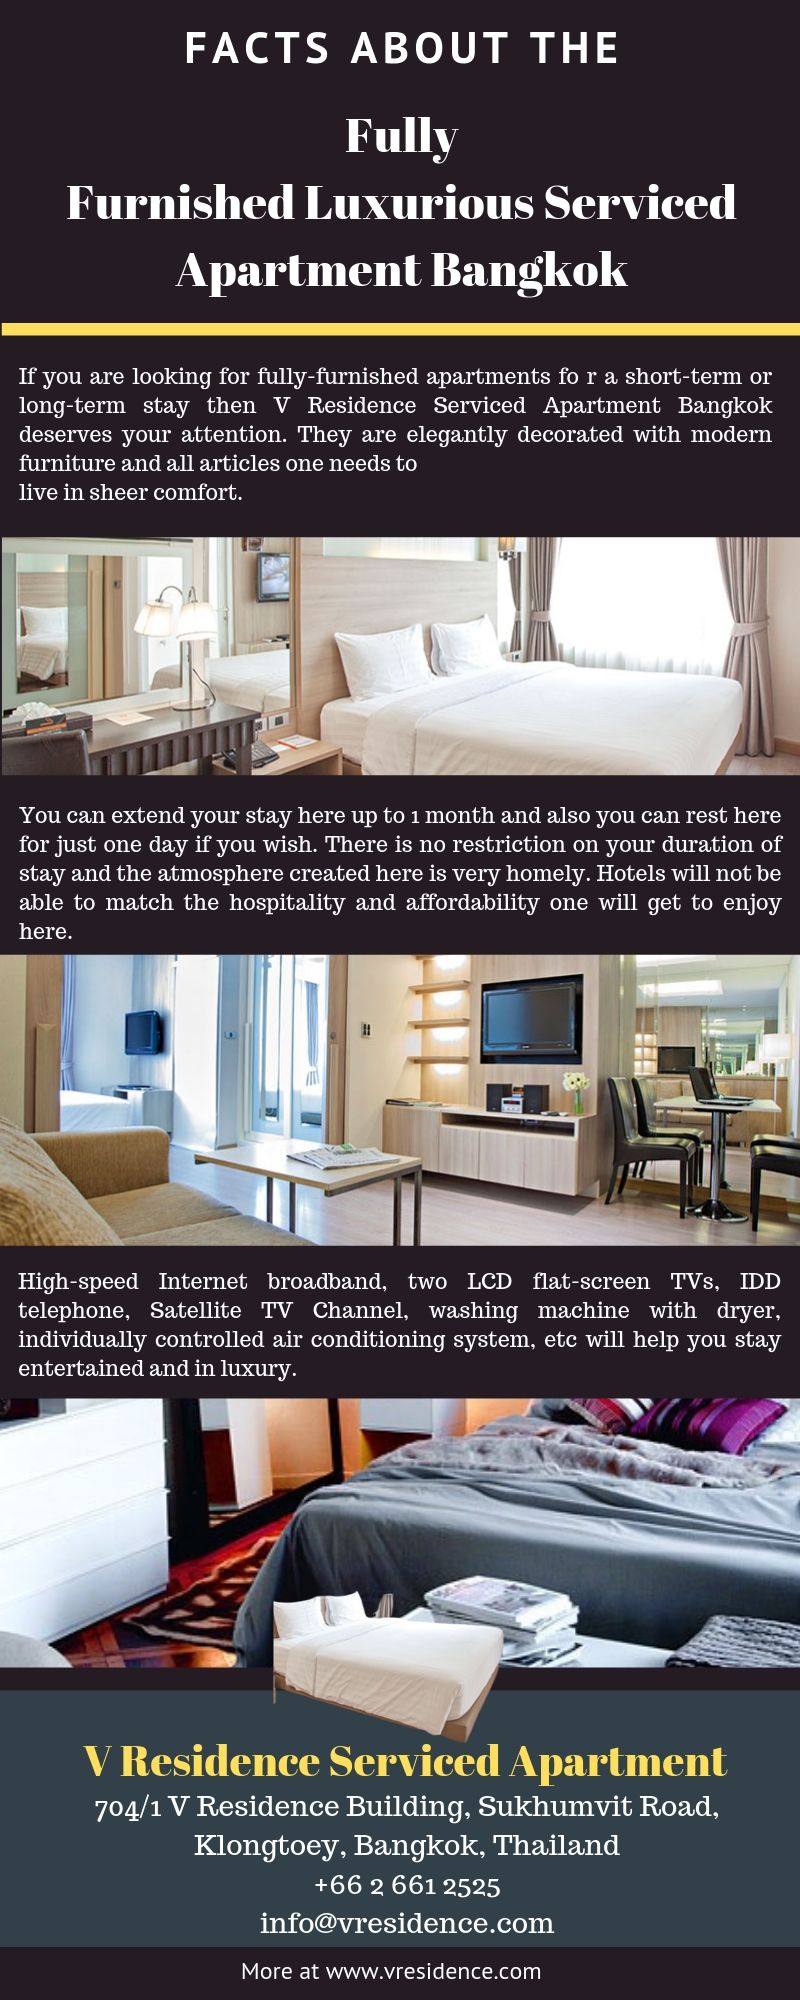 Facts about the Fully Furnished Luxurious Serviced Apartment Bangkok.jpg  by vresidence